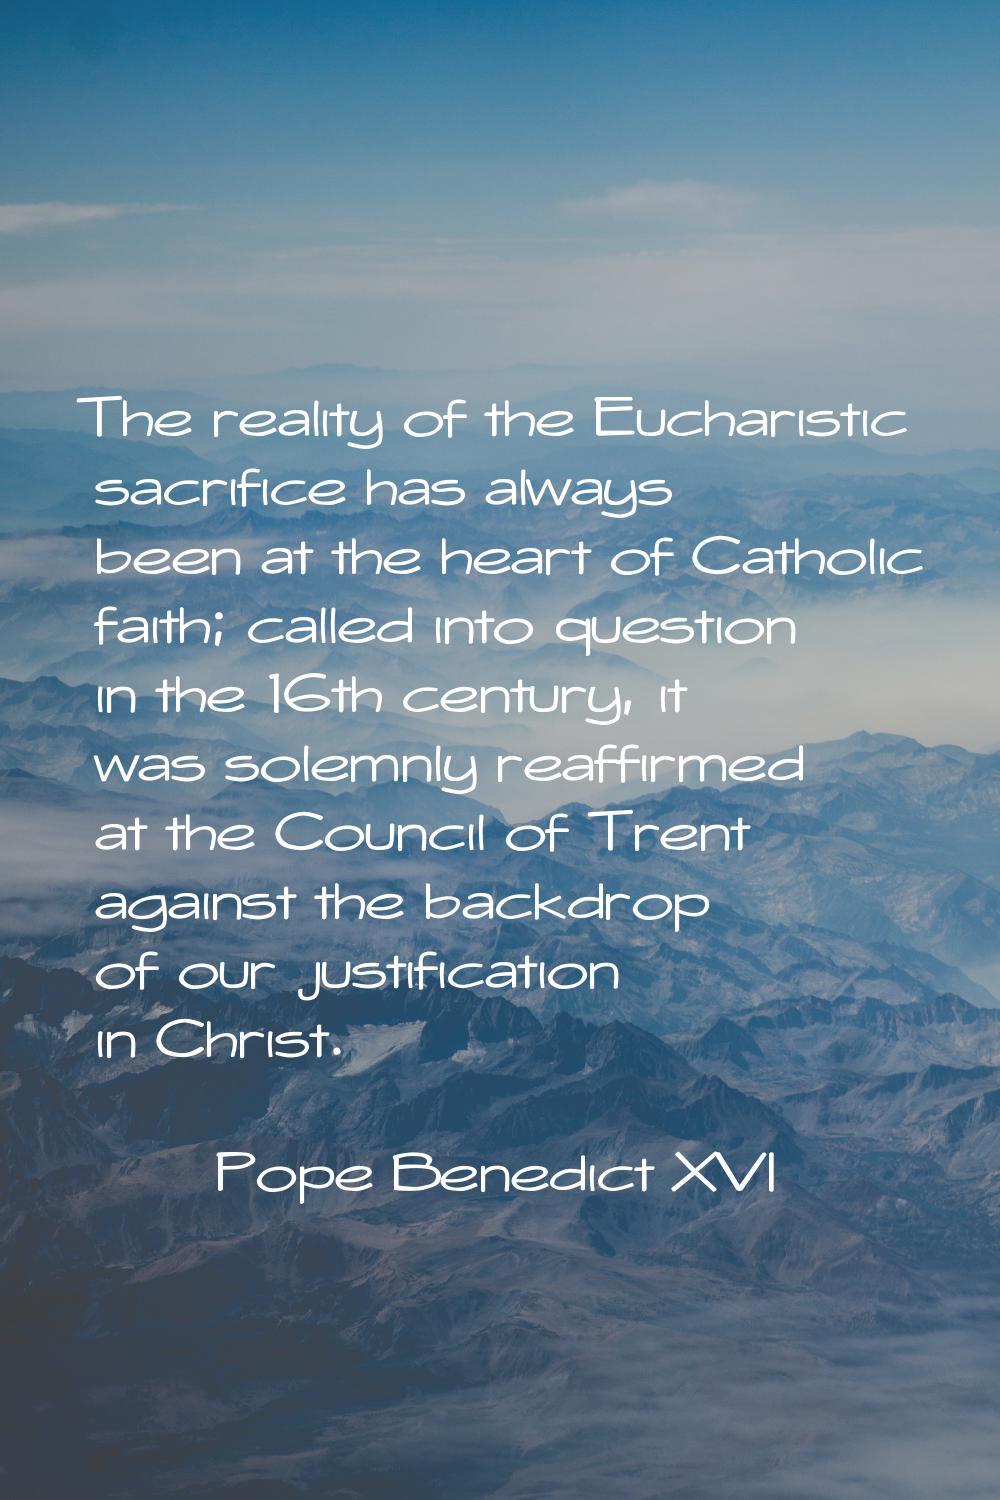 The reality of the Eucharistic sacrifice has always been at the heart of Catholic faith; called int